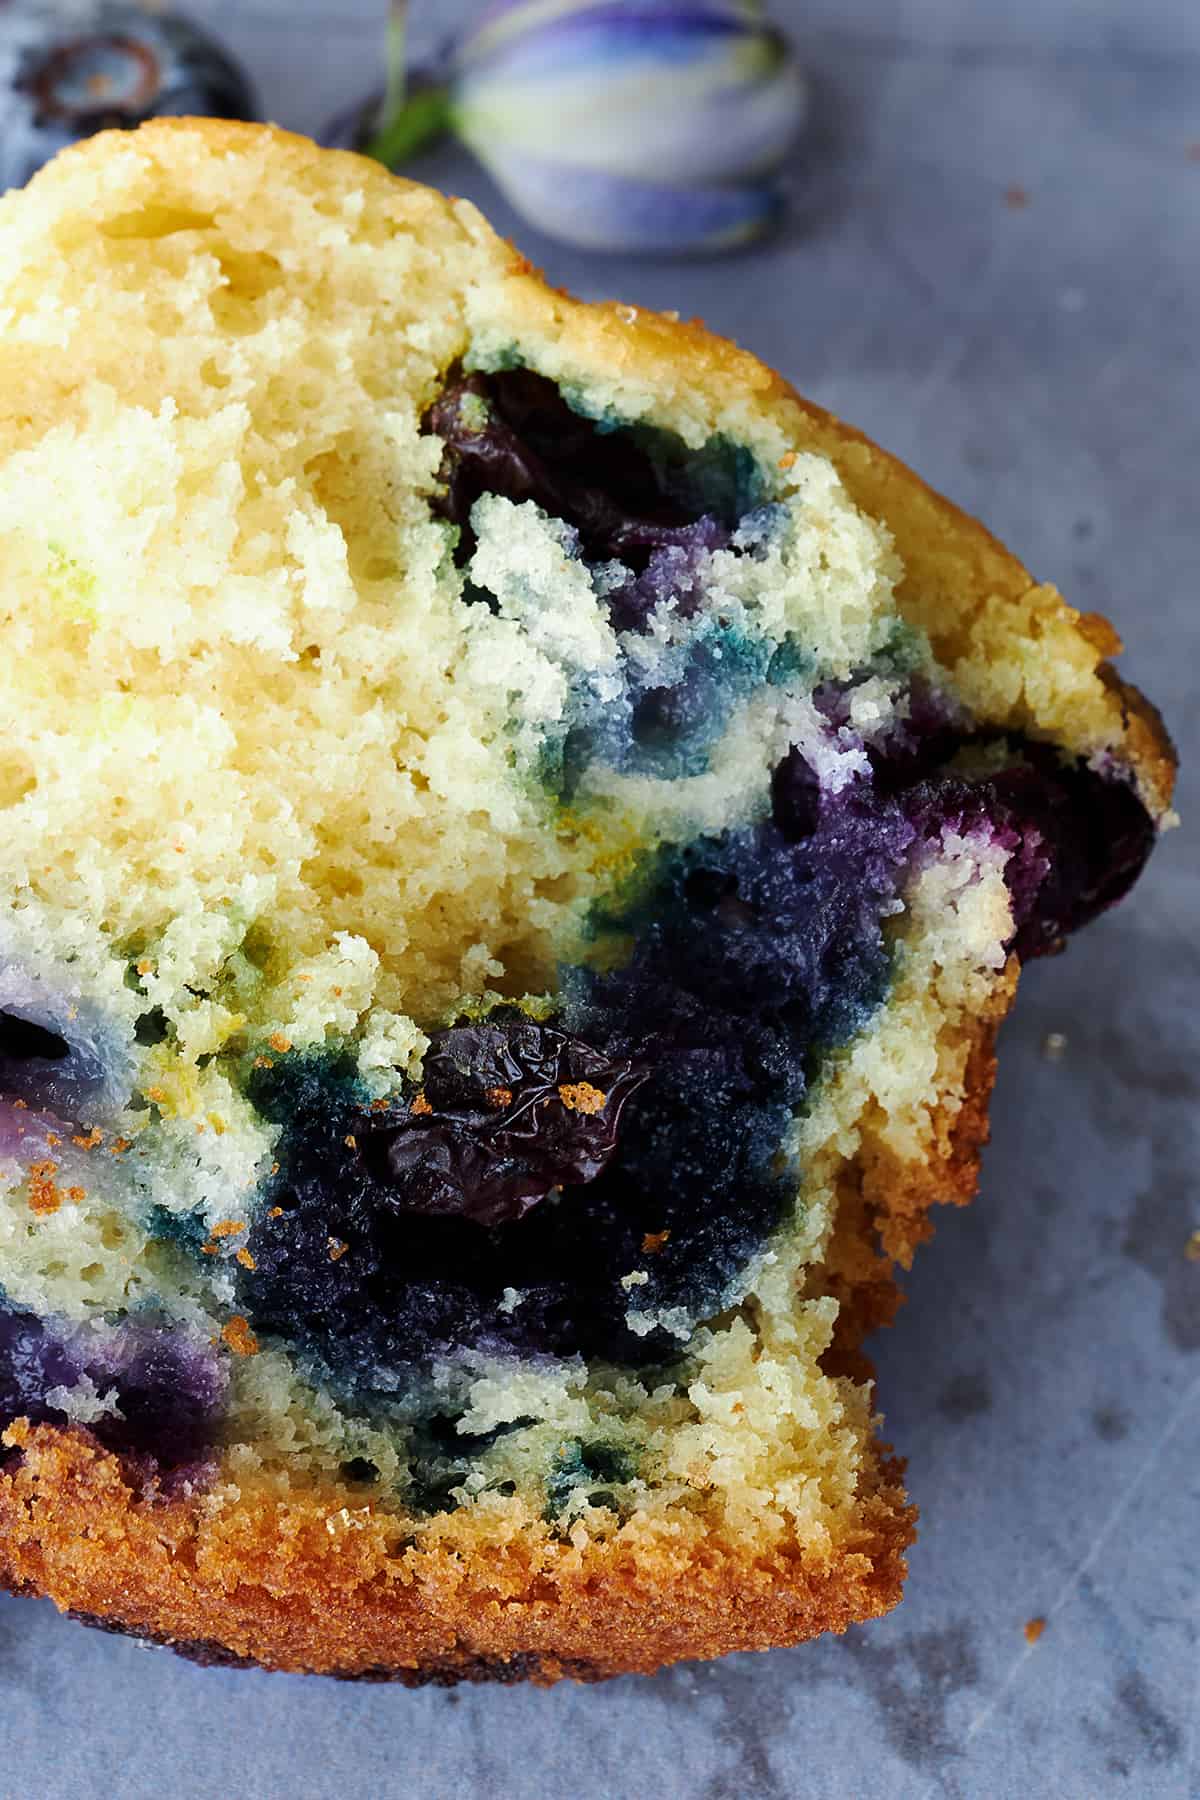 Half a Starbucks blueberry muffin, showing the soft fluffy center. 